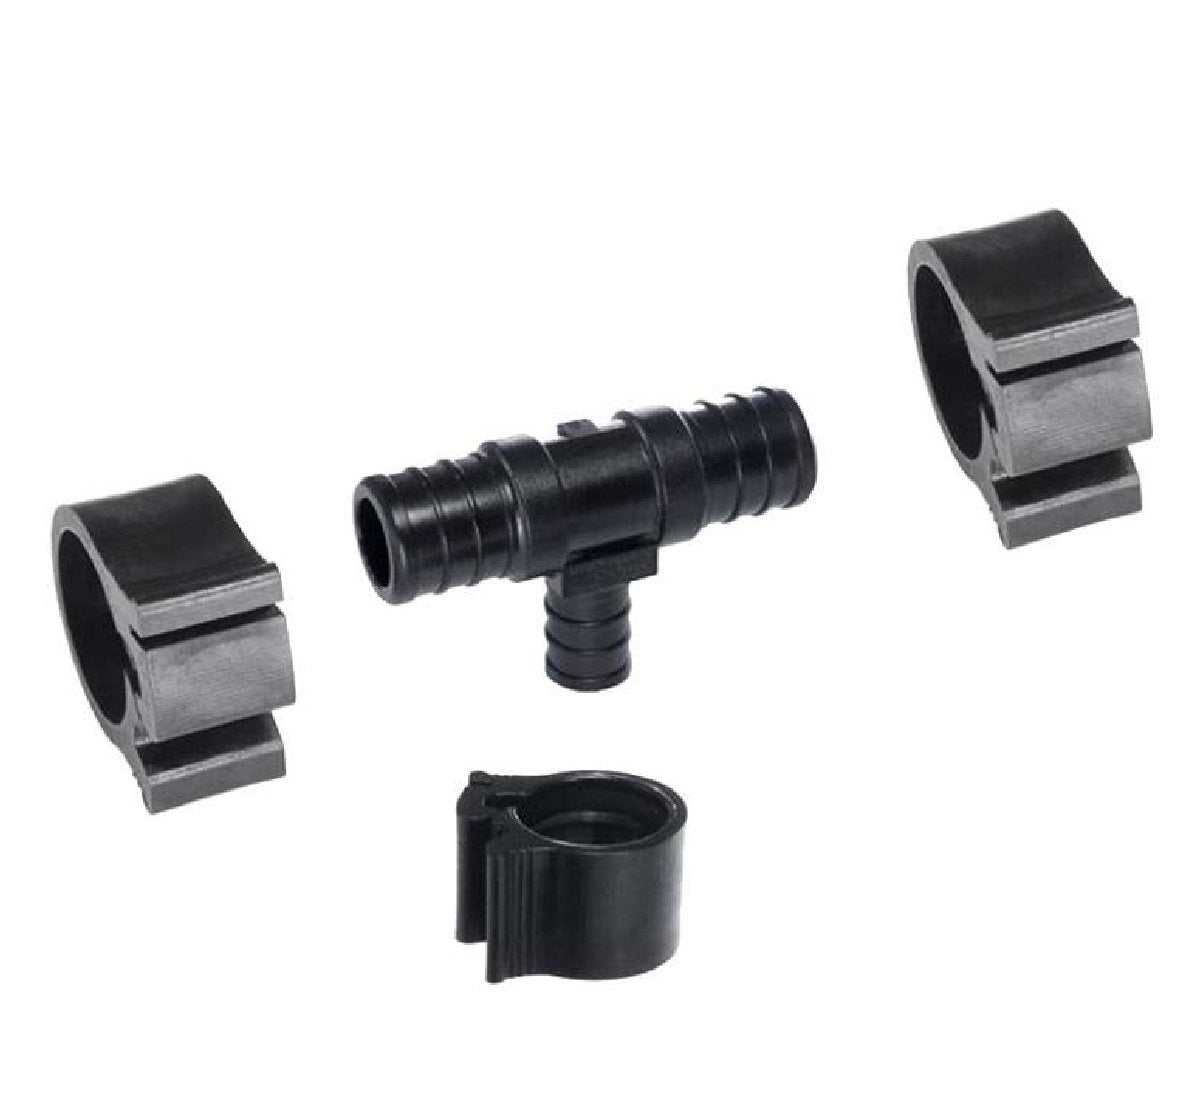 PEXLock 30834 Black Pipe Tee with Clamp, 1/2" x 1/2" x 1/8" FPT